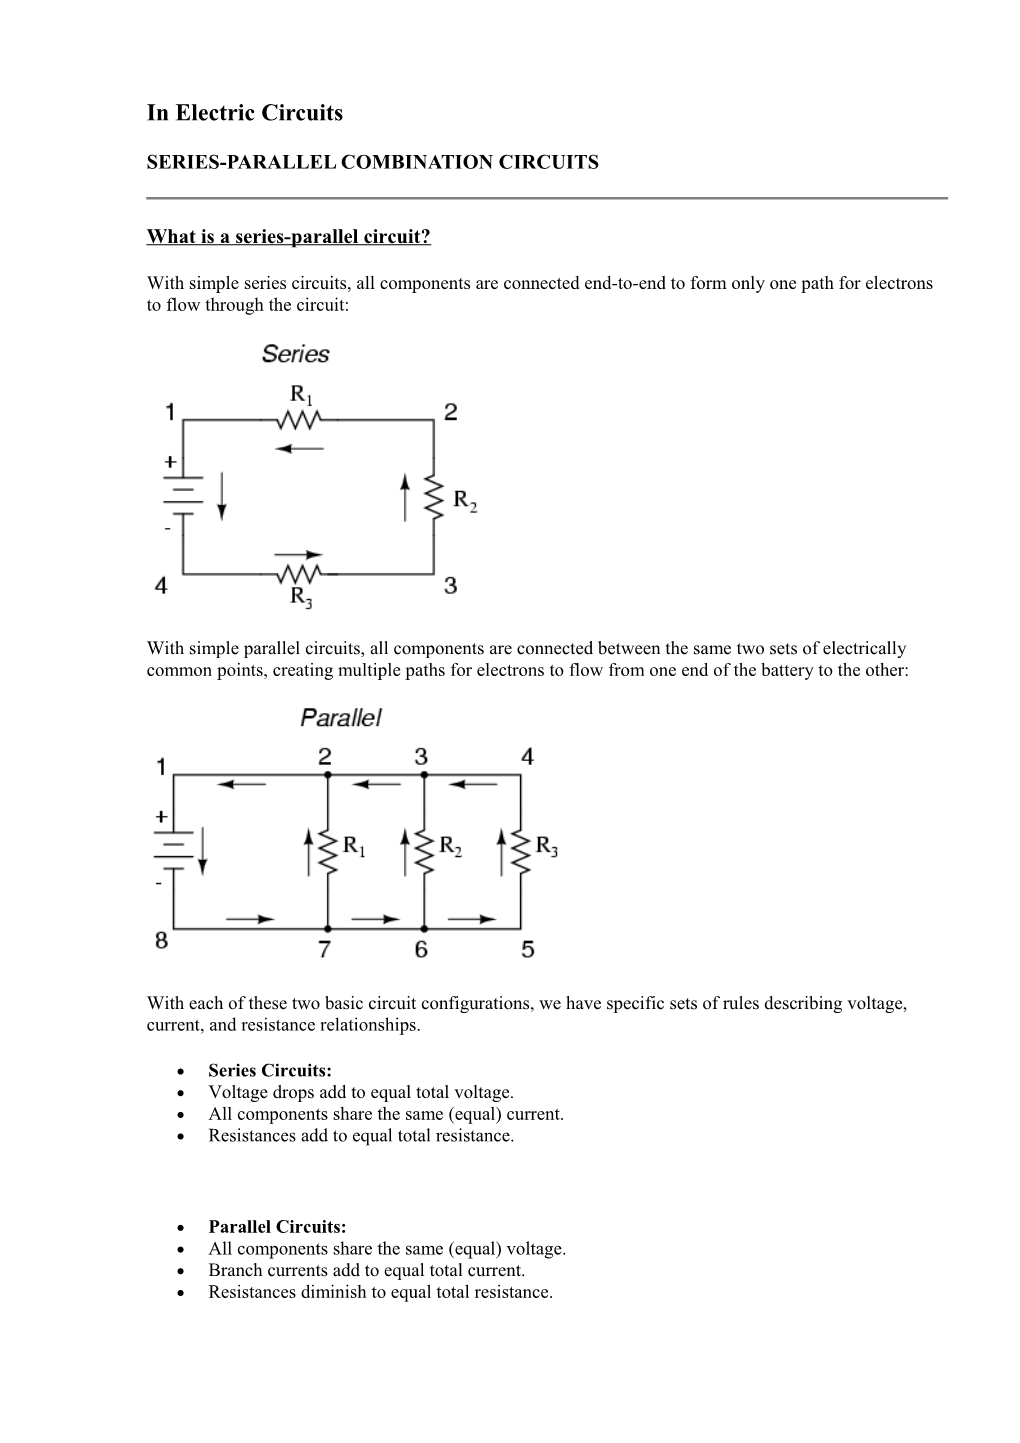 In Electric Circuits